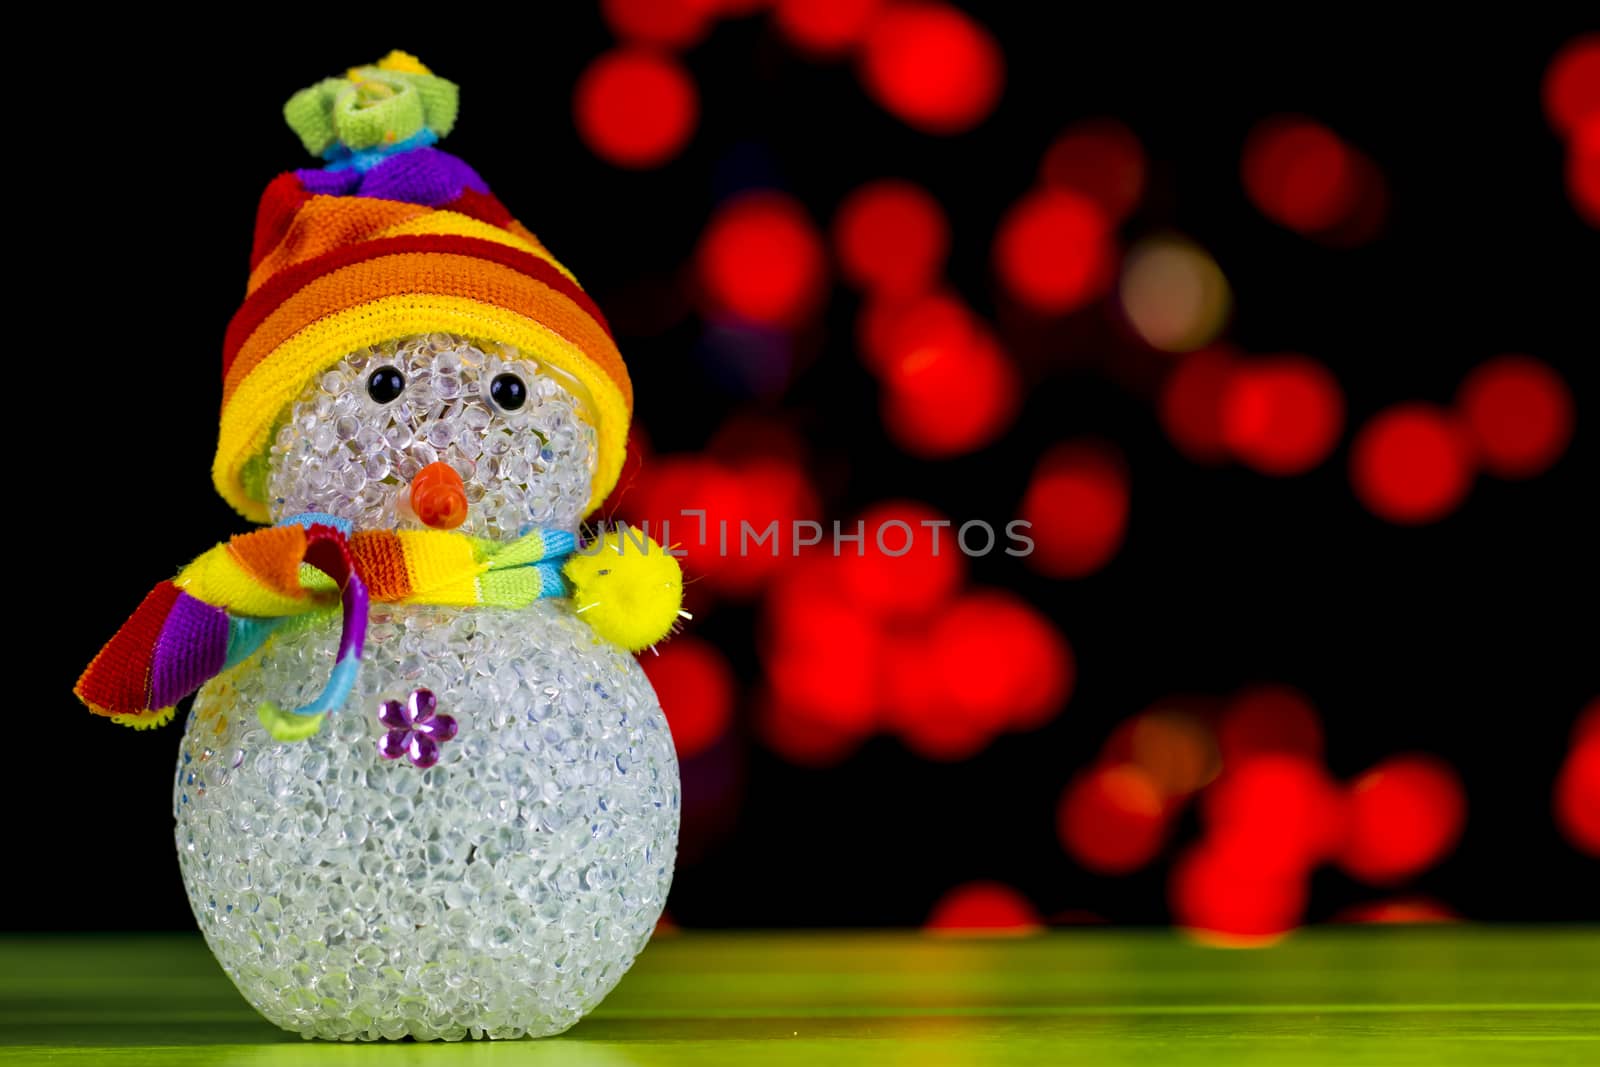 Snowman and red  light bulb by Chattranusorn09